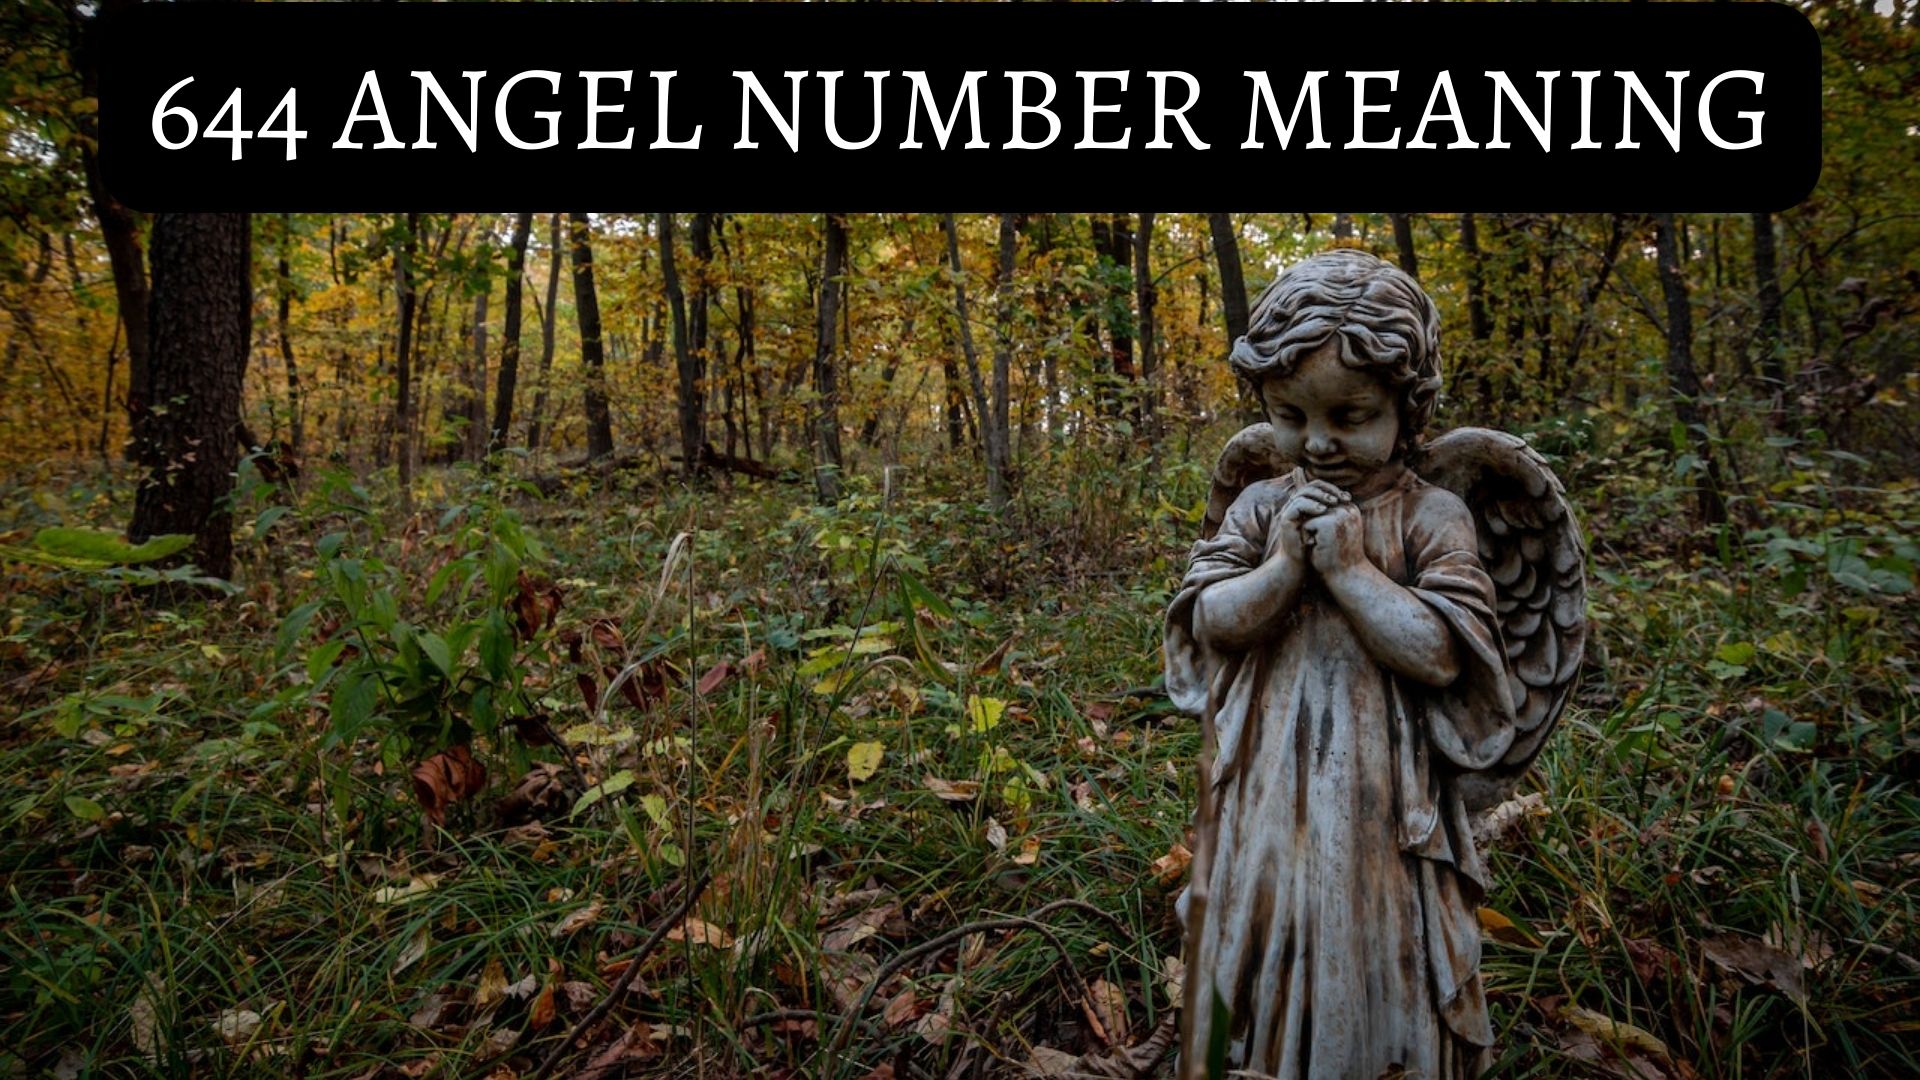 644 Angel Number Meaning - A Sign Of Hope And A Warning